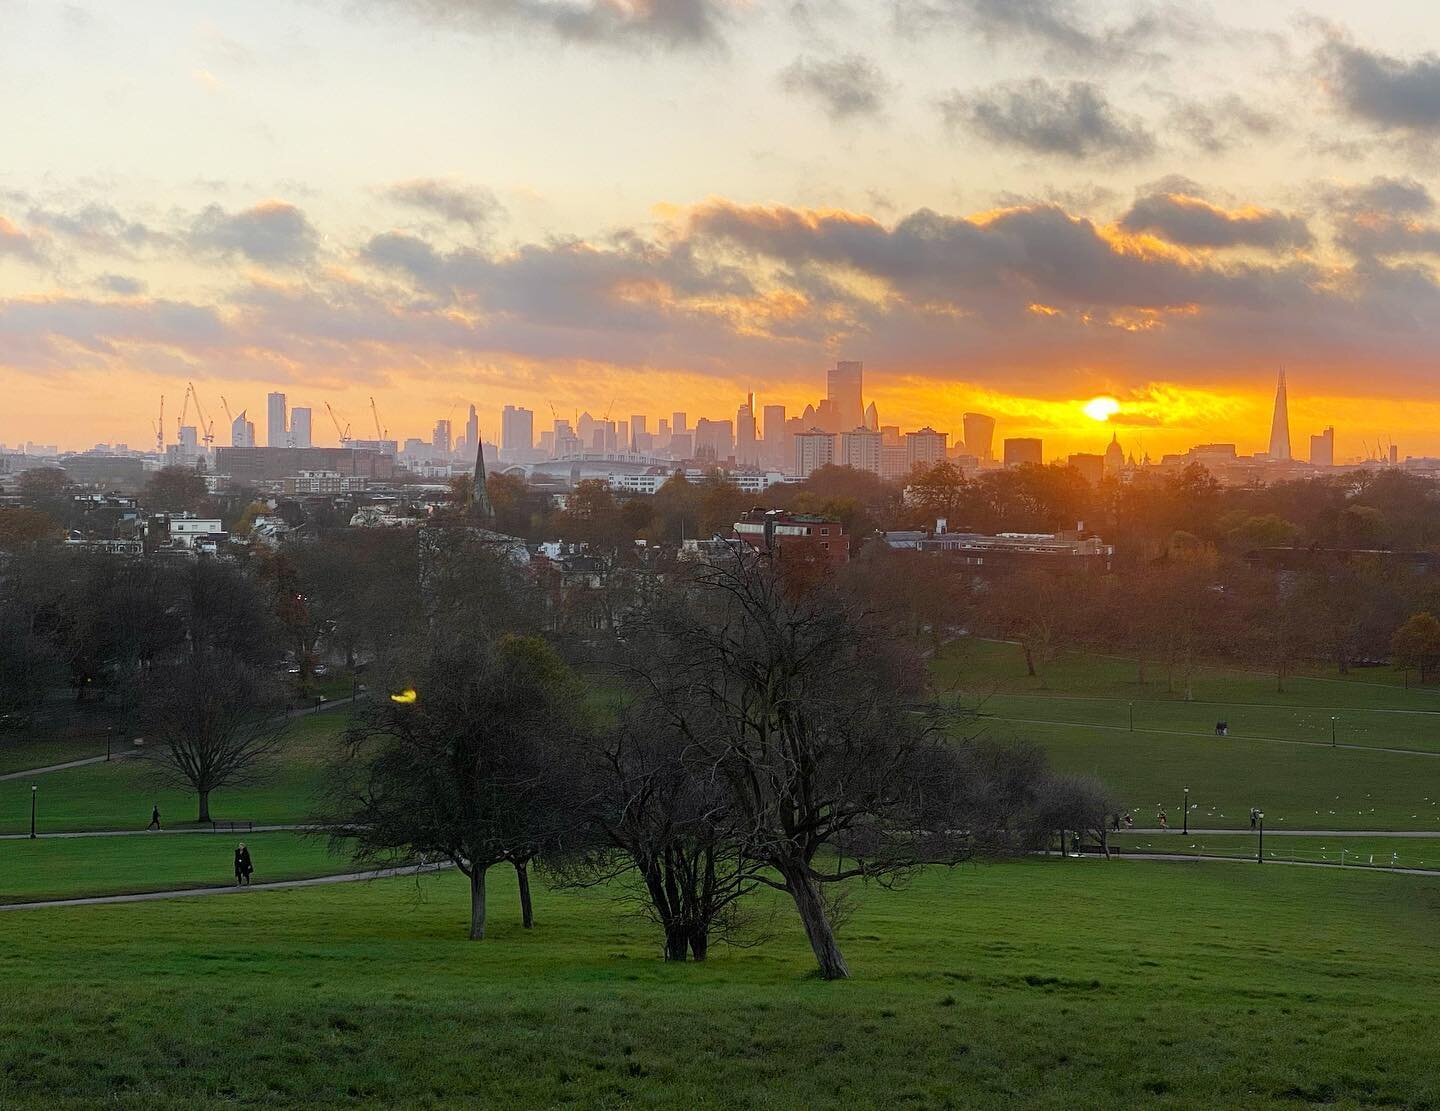 Although we may be back in lockdown here in London, I am thankful we can still go out for exercise and meet up with one other person outside. Thanks for the sunrise session @kassondracloos ! 

#london #londonlife #primrosehill #sunrise #lockdown2 #pa